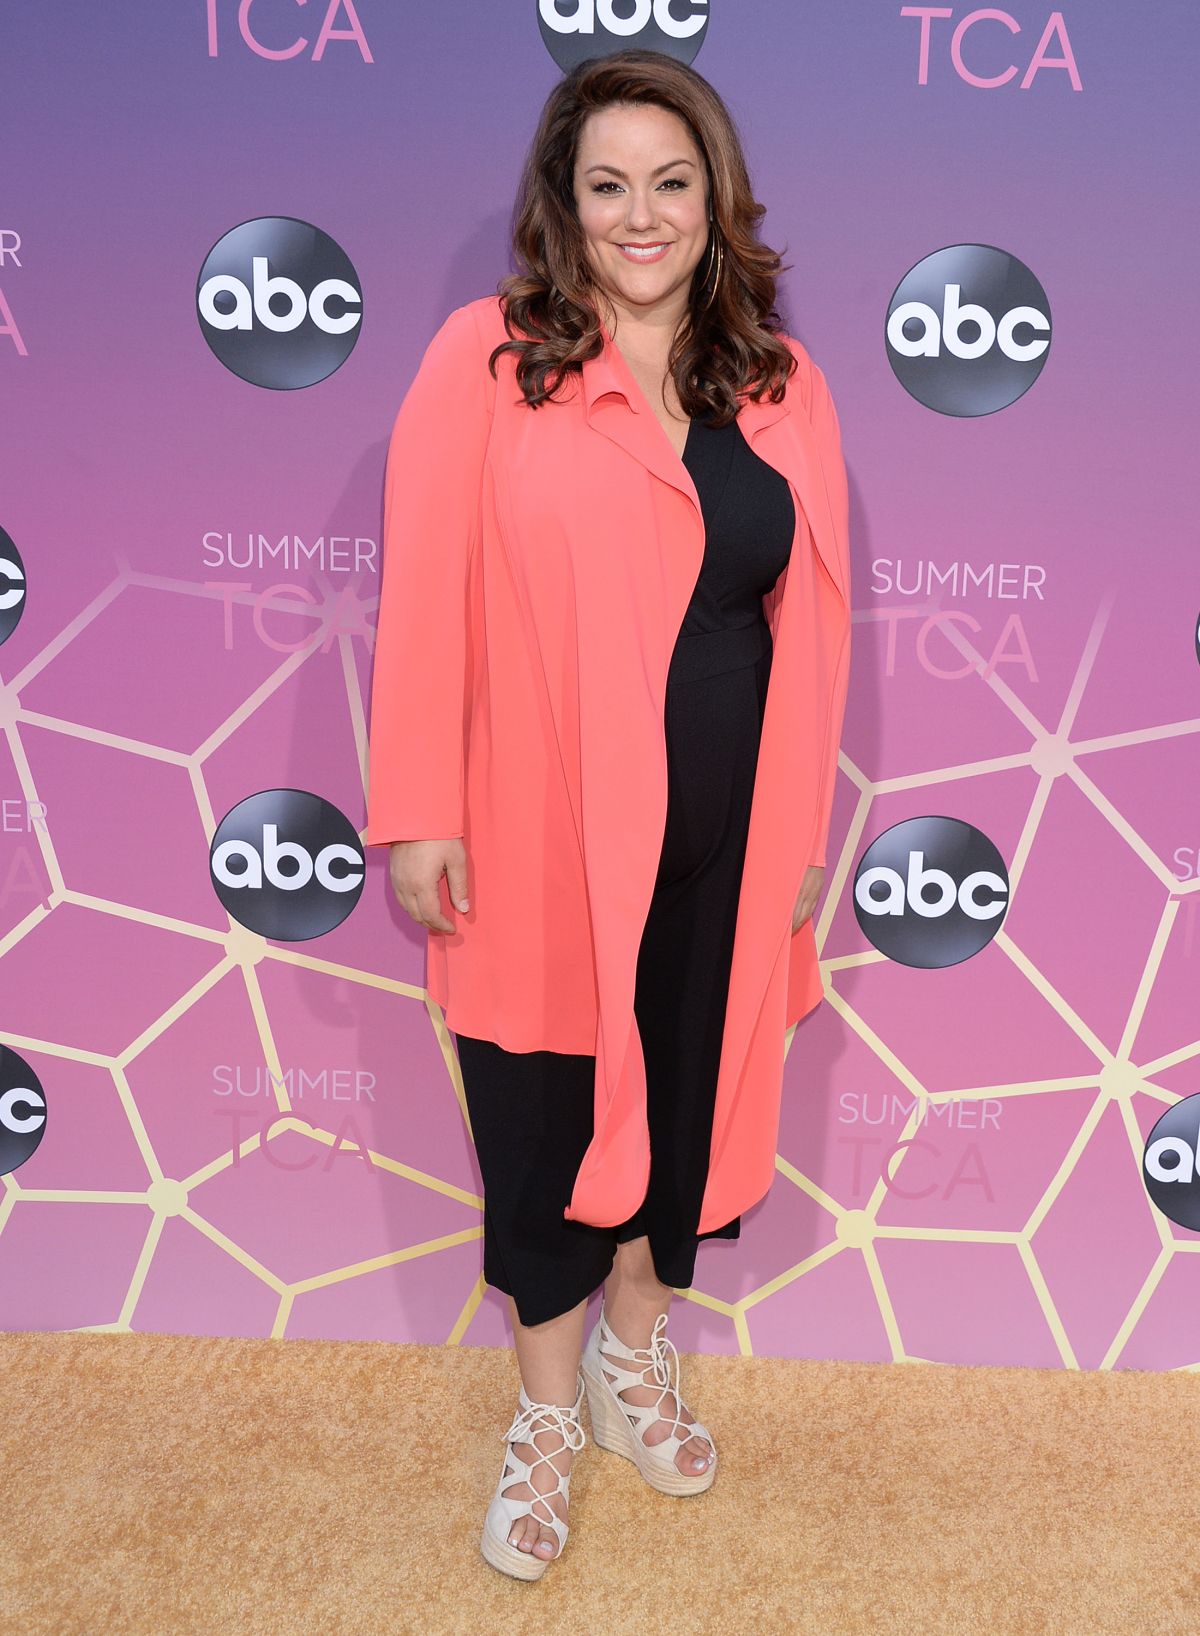 KATY MIXON at ABC’s TCA Summer Press Tour in West Hollywood 08/05/2019